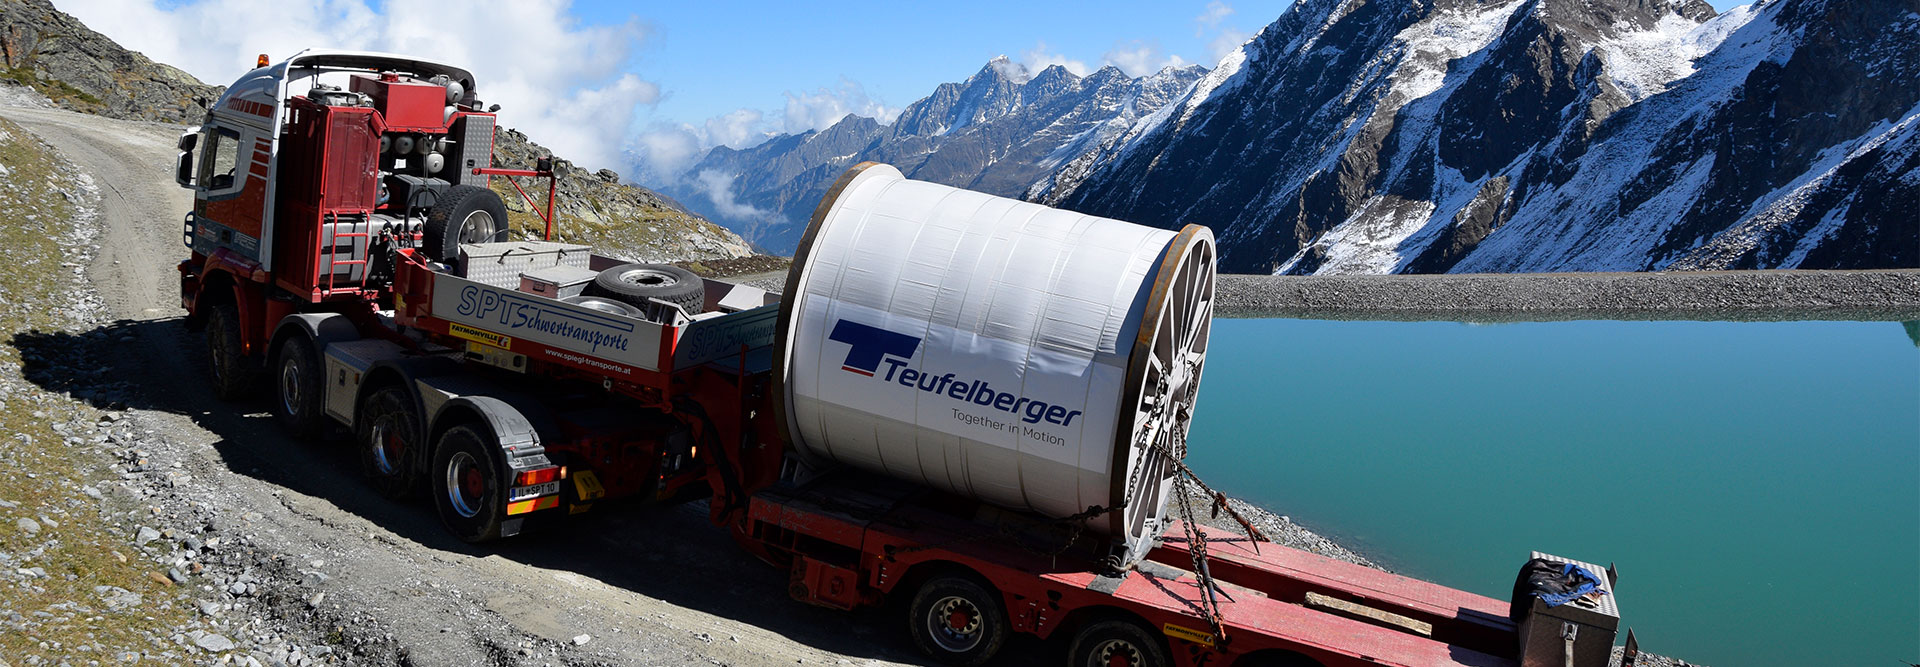 Rope transport for the 3S Eisgratbahn ropeway to the Stubai Glacier